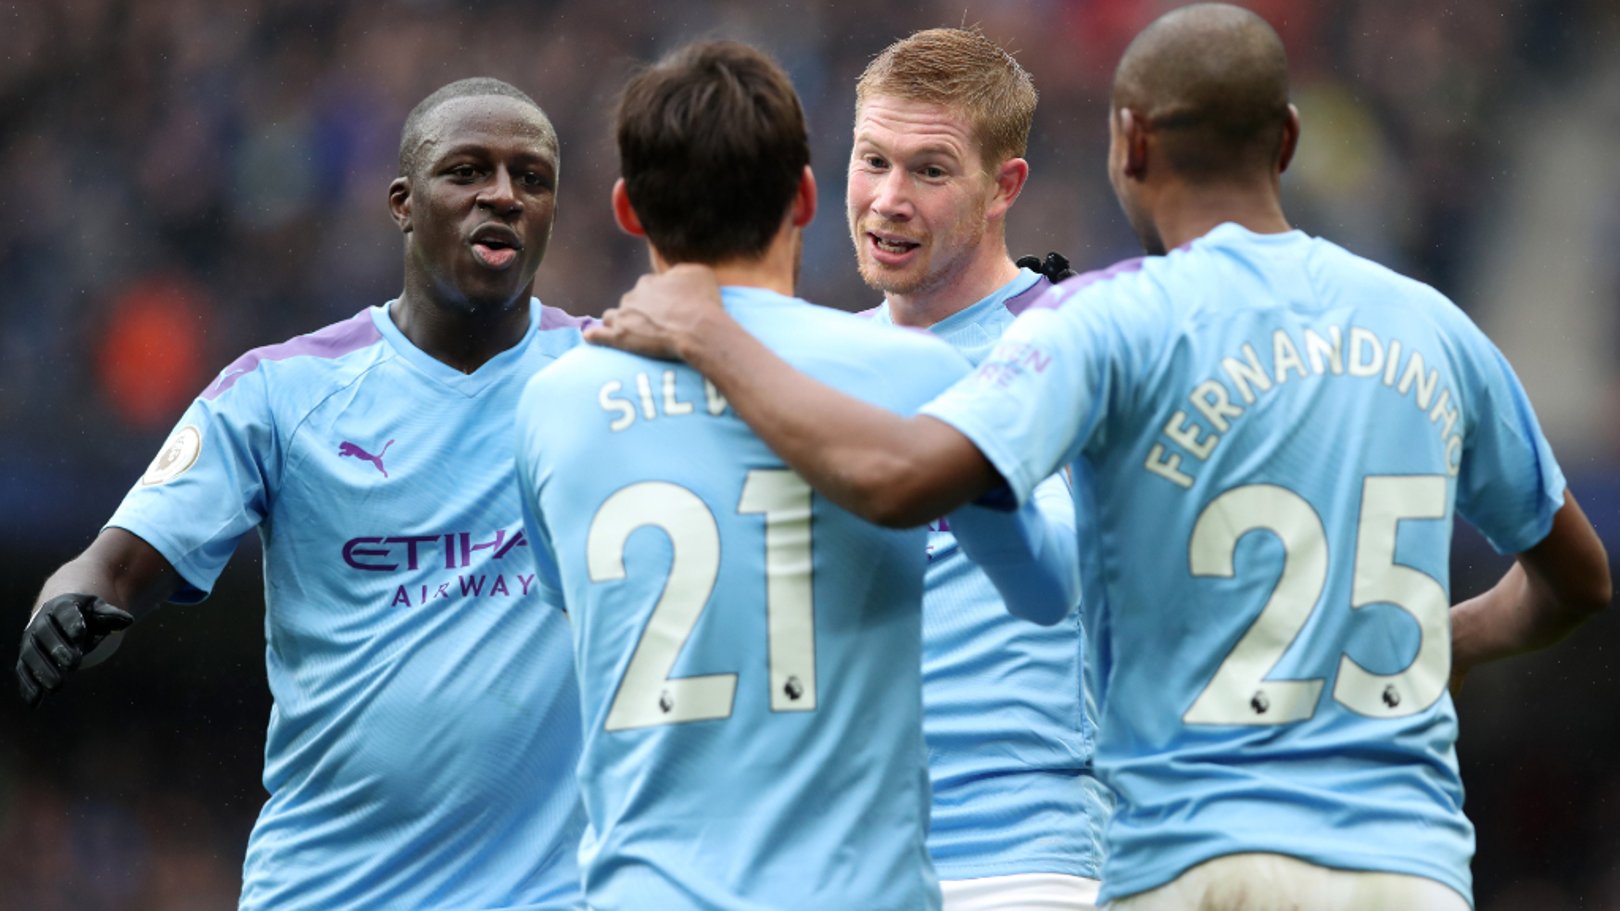 IT'S MY GOAL!: Kevin De Bruyne and David Silva light-heartedly contest the scoring rights!